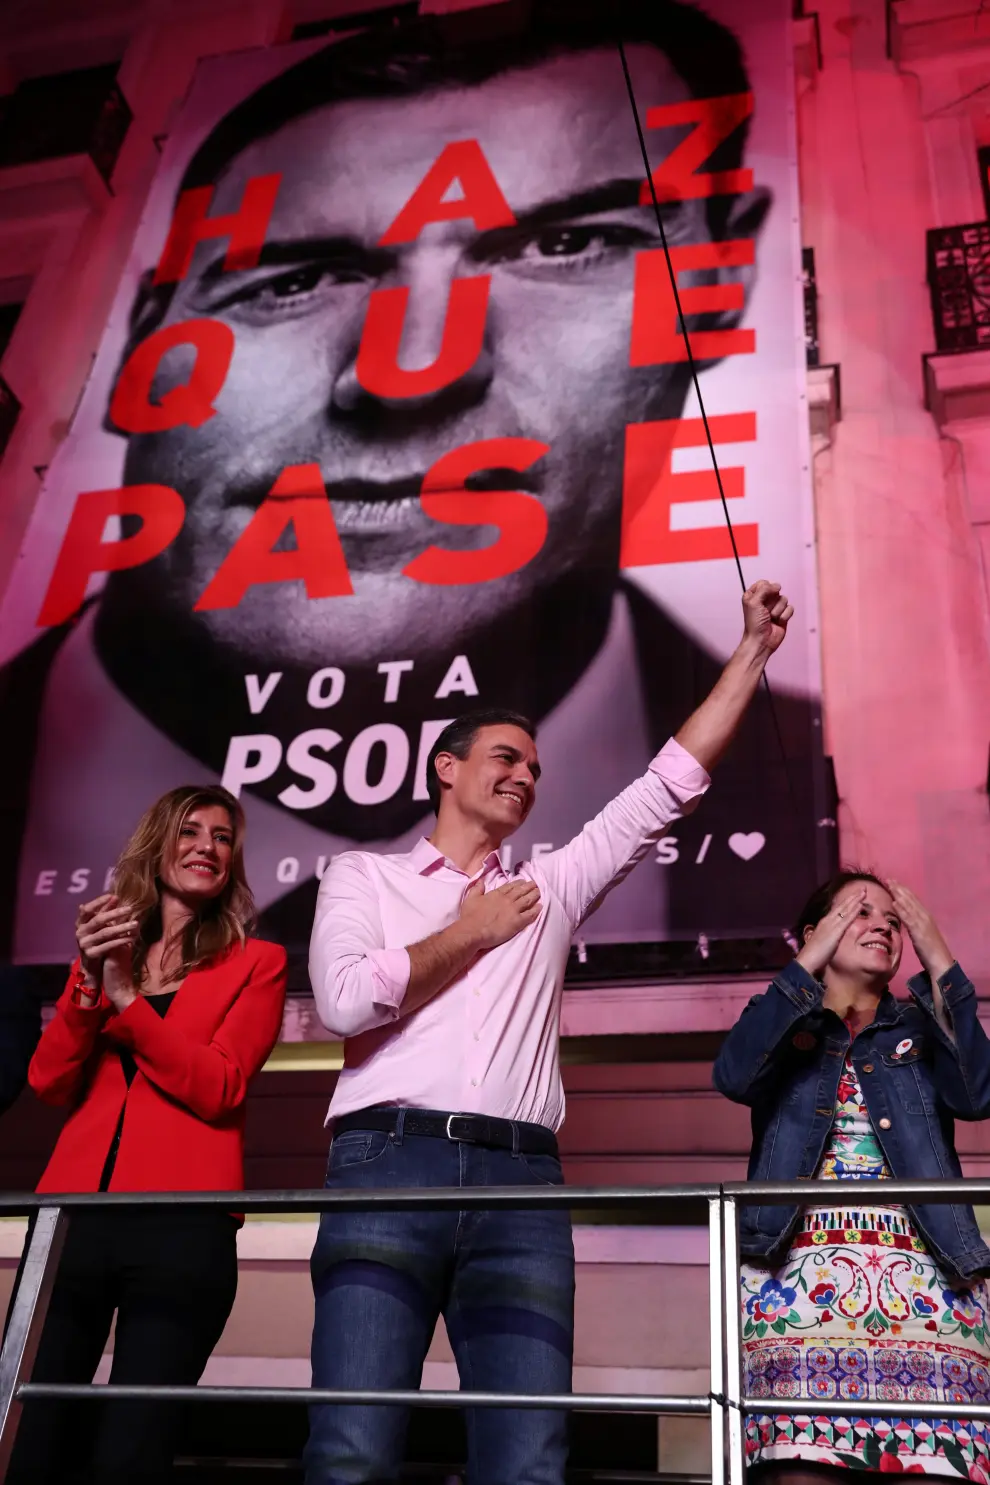 Spain's Prime Minister Pedro Sanchez of the Socialist Workers' Party (PSOE) reacts while celebrating the result in Spain's general election in Madrid, Spain, April 28, 2019. REUTERS/Sergio Perez [[[REUTERS VOCENTO]]] SPAIN-ELECTION/SANCHEZ REAX